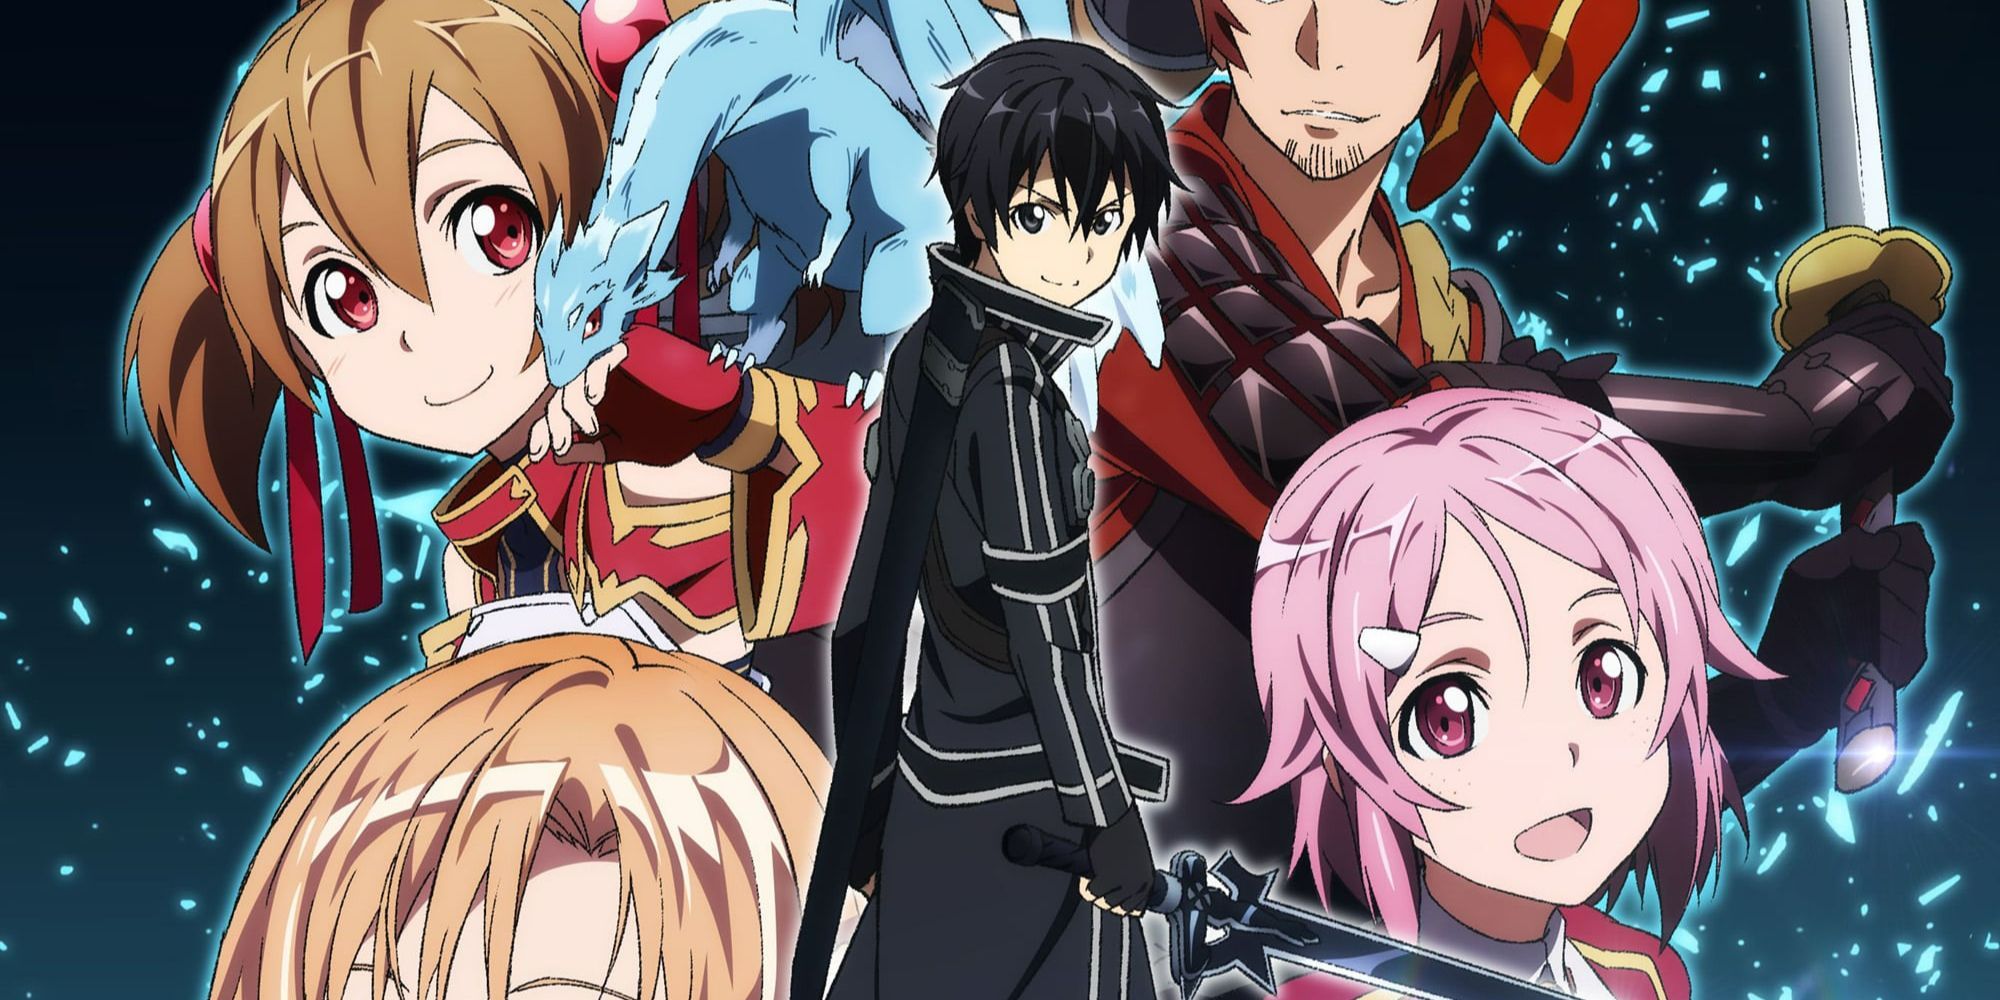 Kirito holding a sword, surrounded by his friends in Sword Art Online